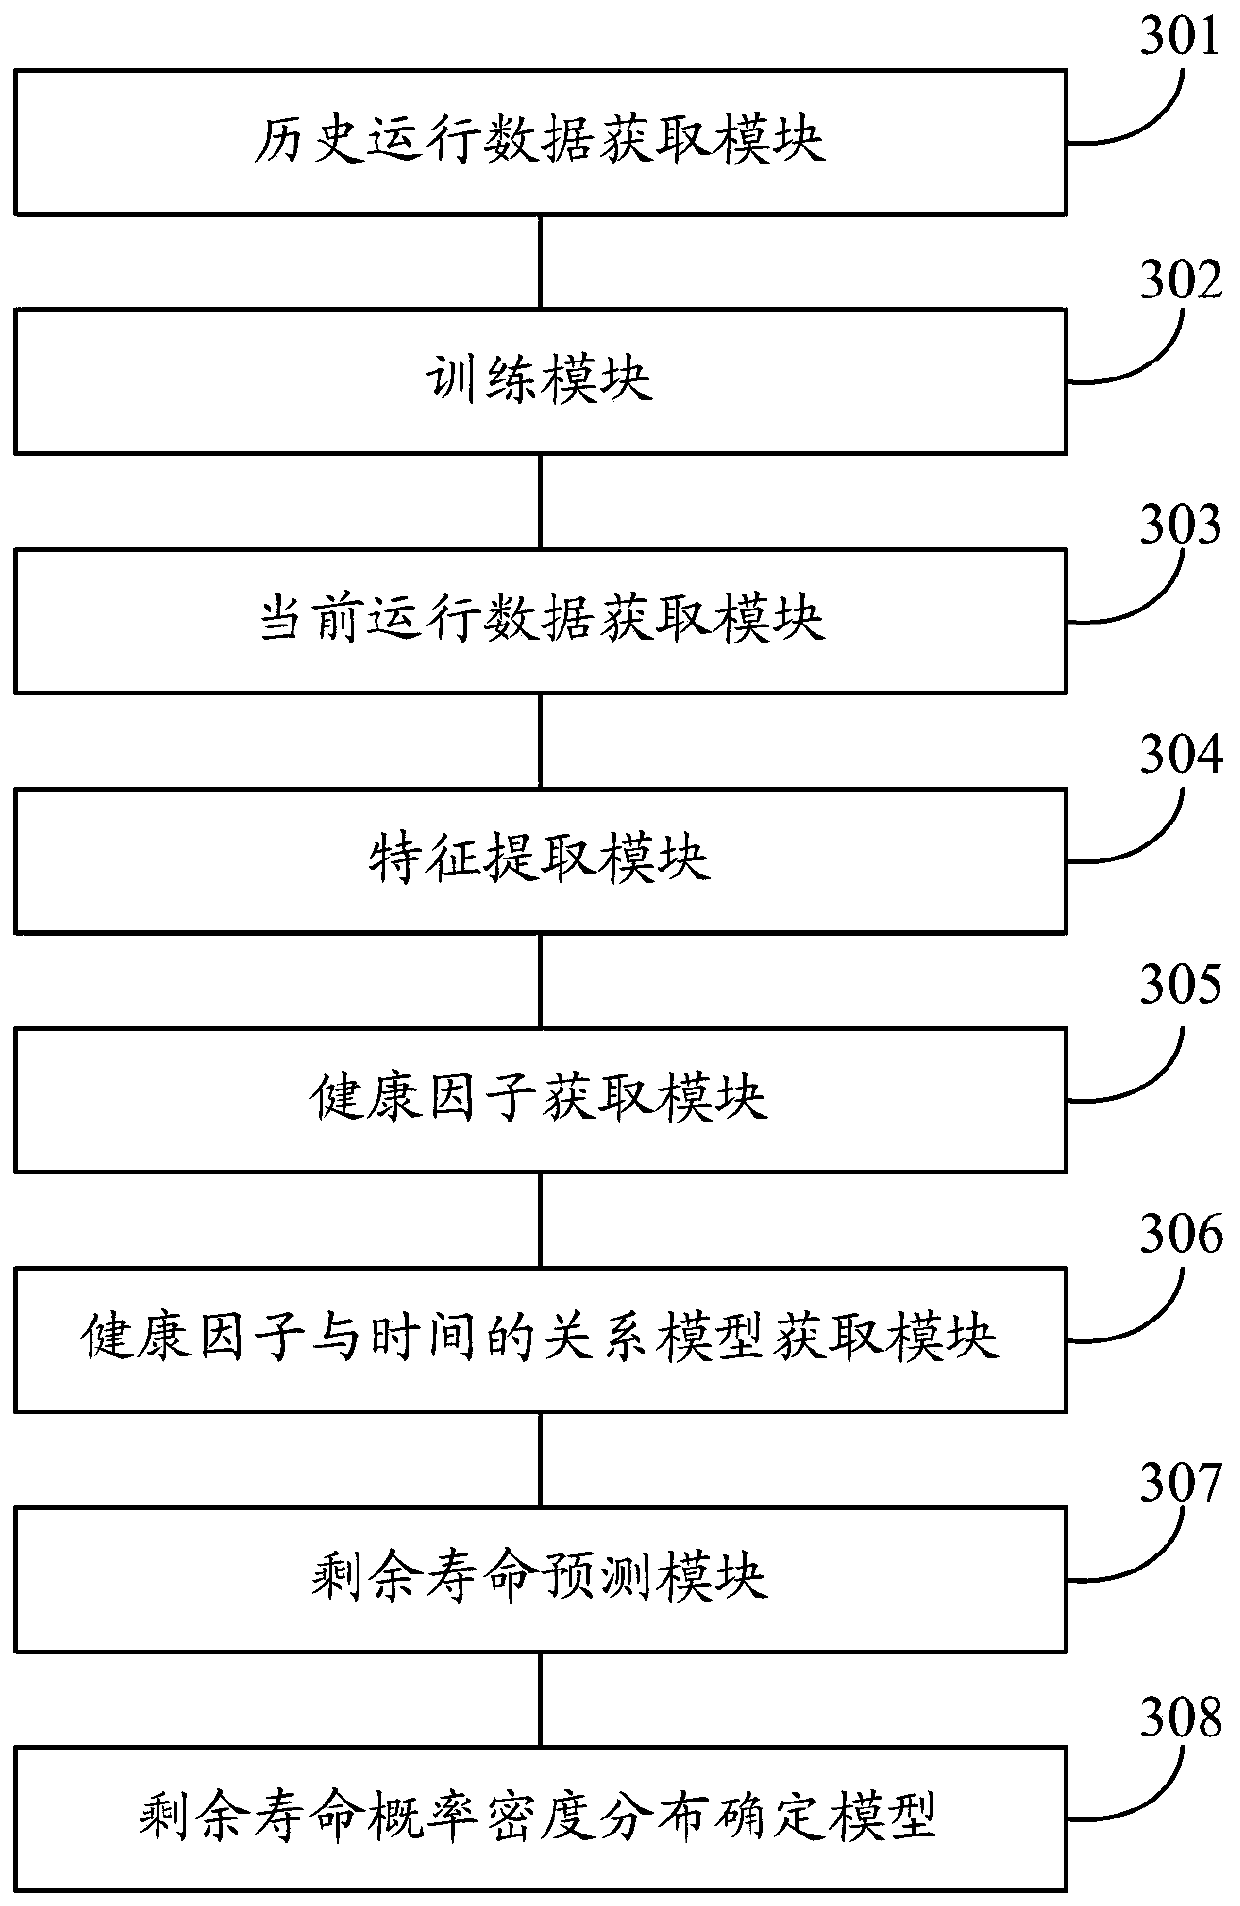 Equipment residual life prediction method and system